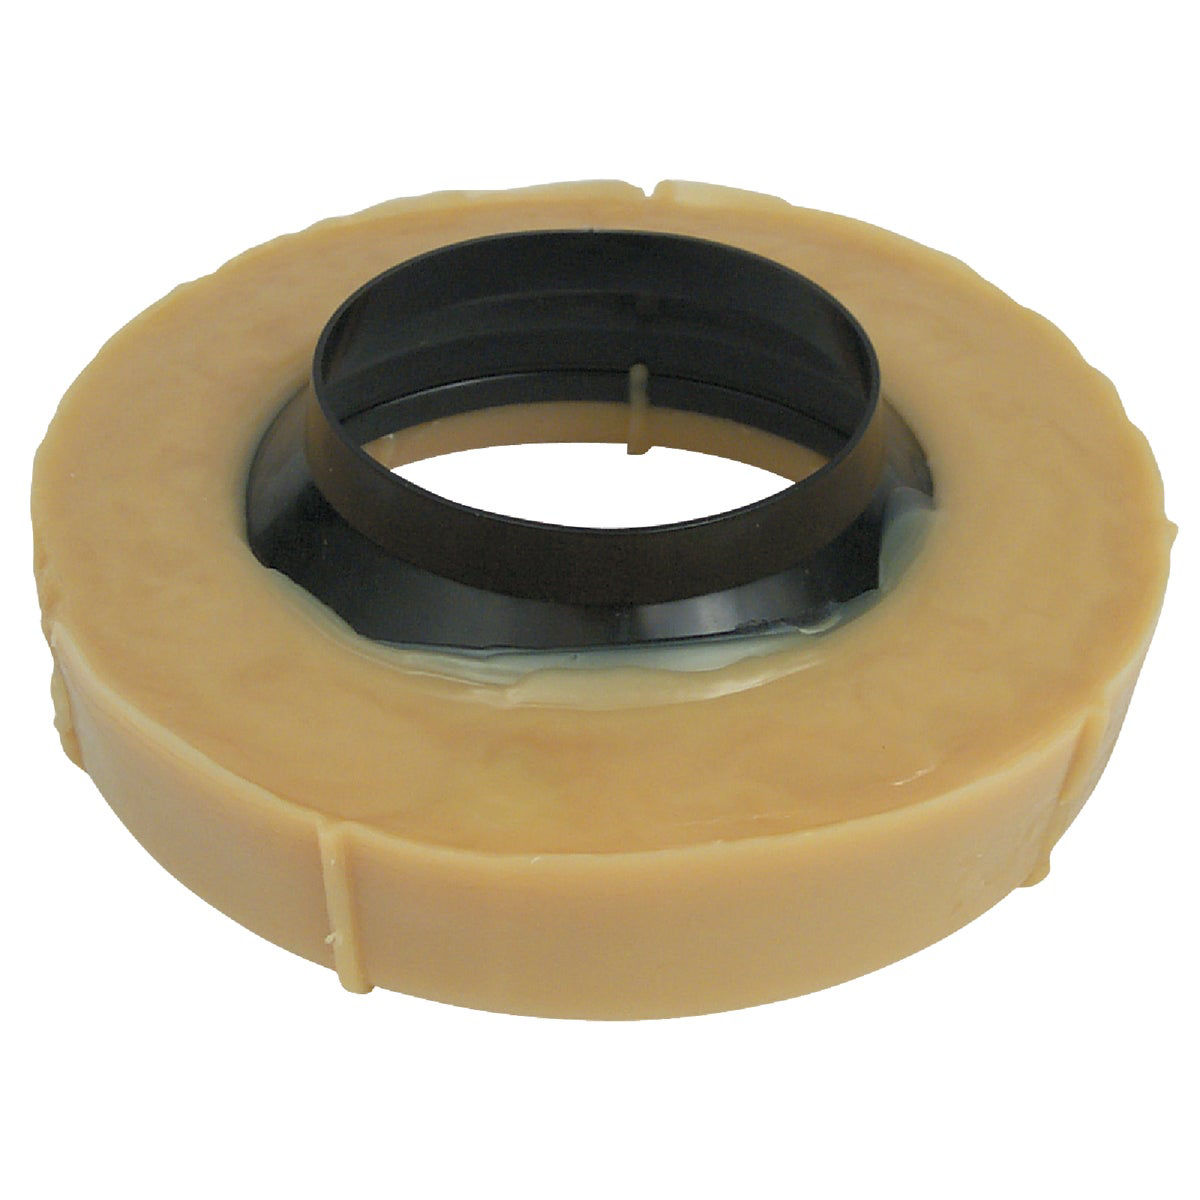 Wood screw lubrication tip: Use toilet bowl wax ring